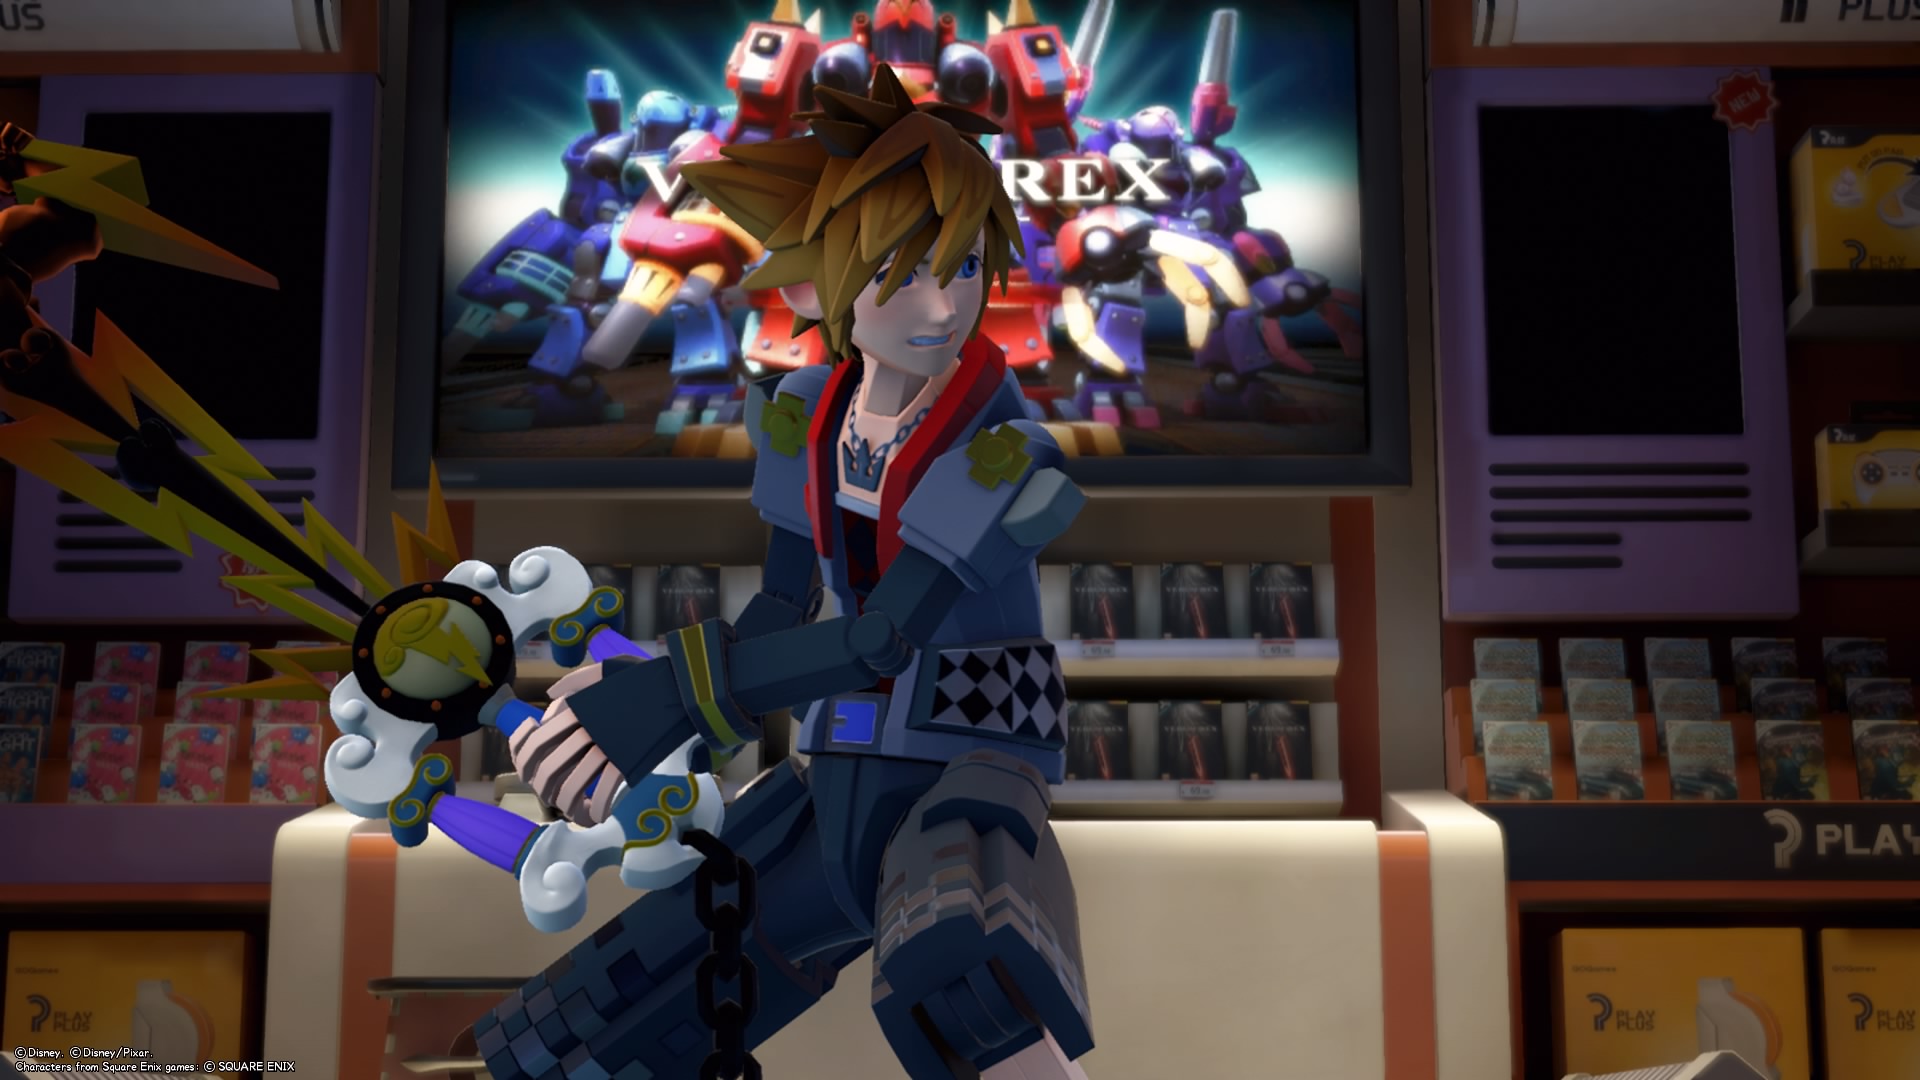 Kingdom Hearts III Review - A Main Attraction Worth Waiting For